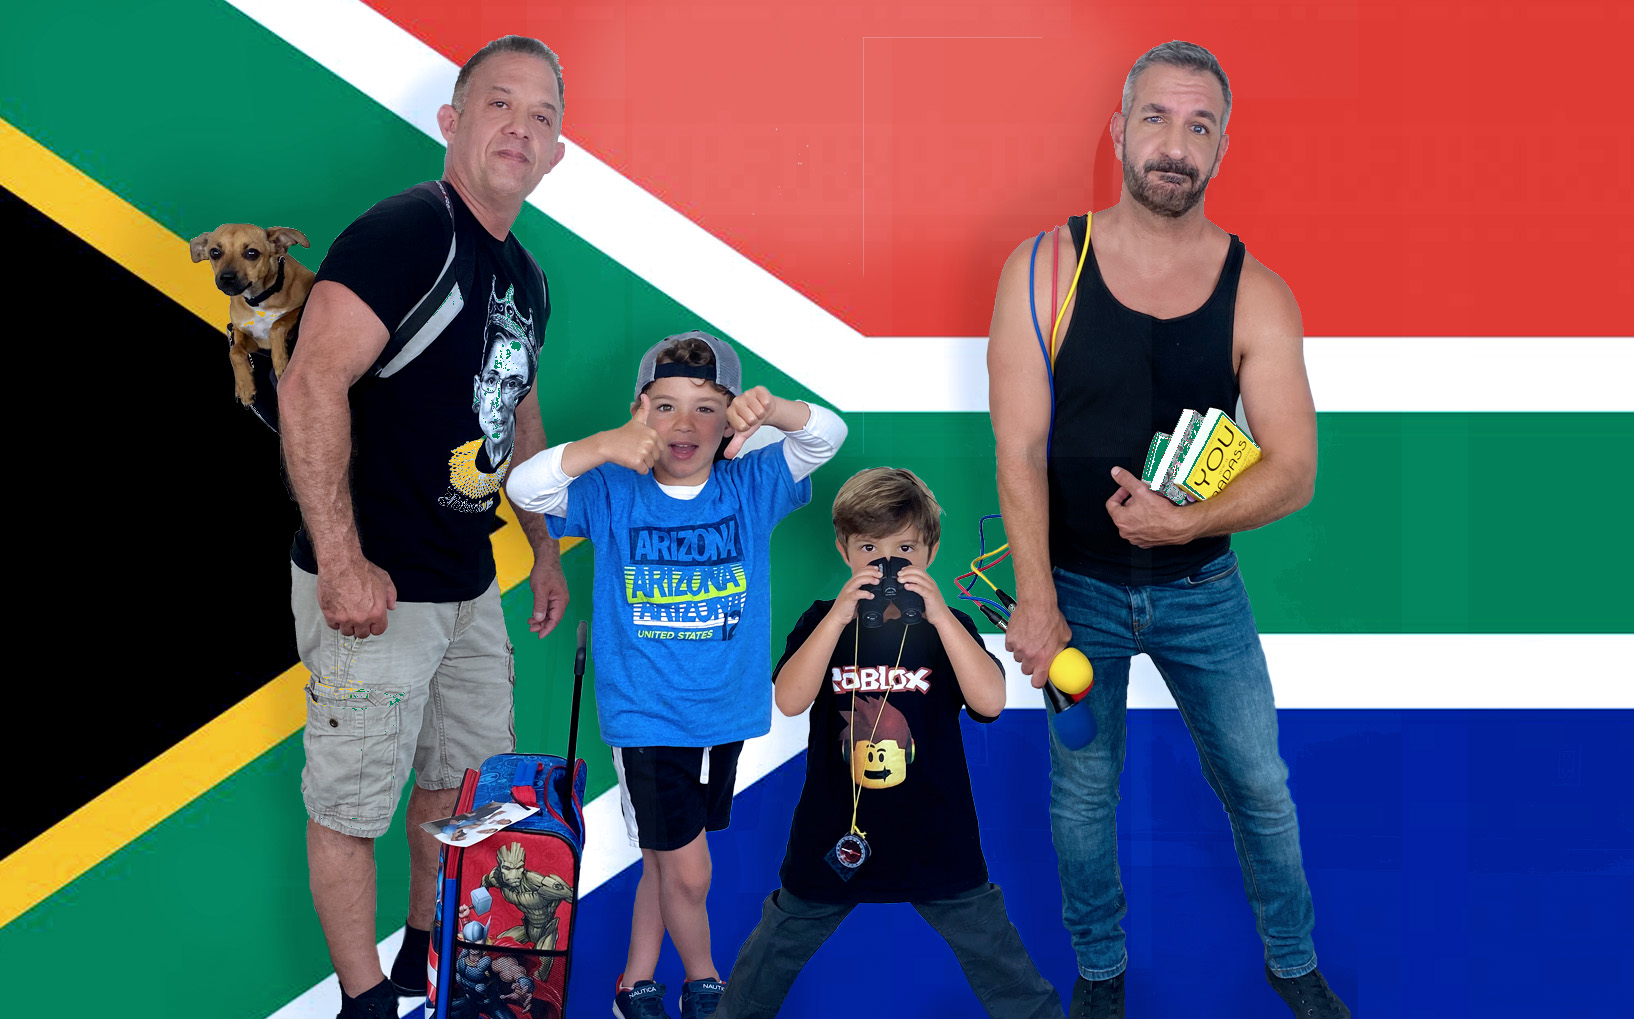 Daddy Squared Around the World: South Africa